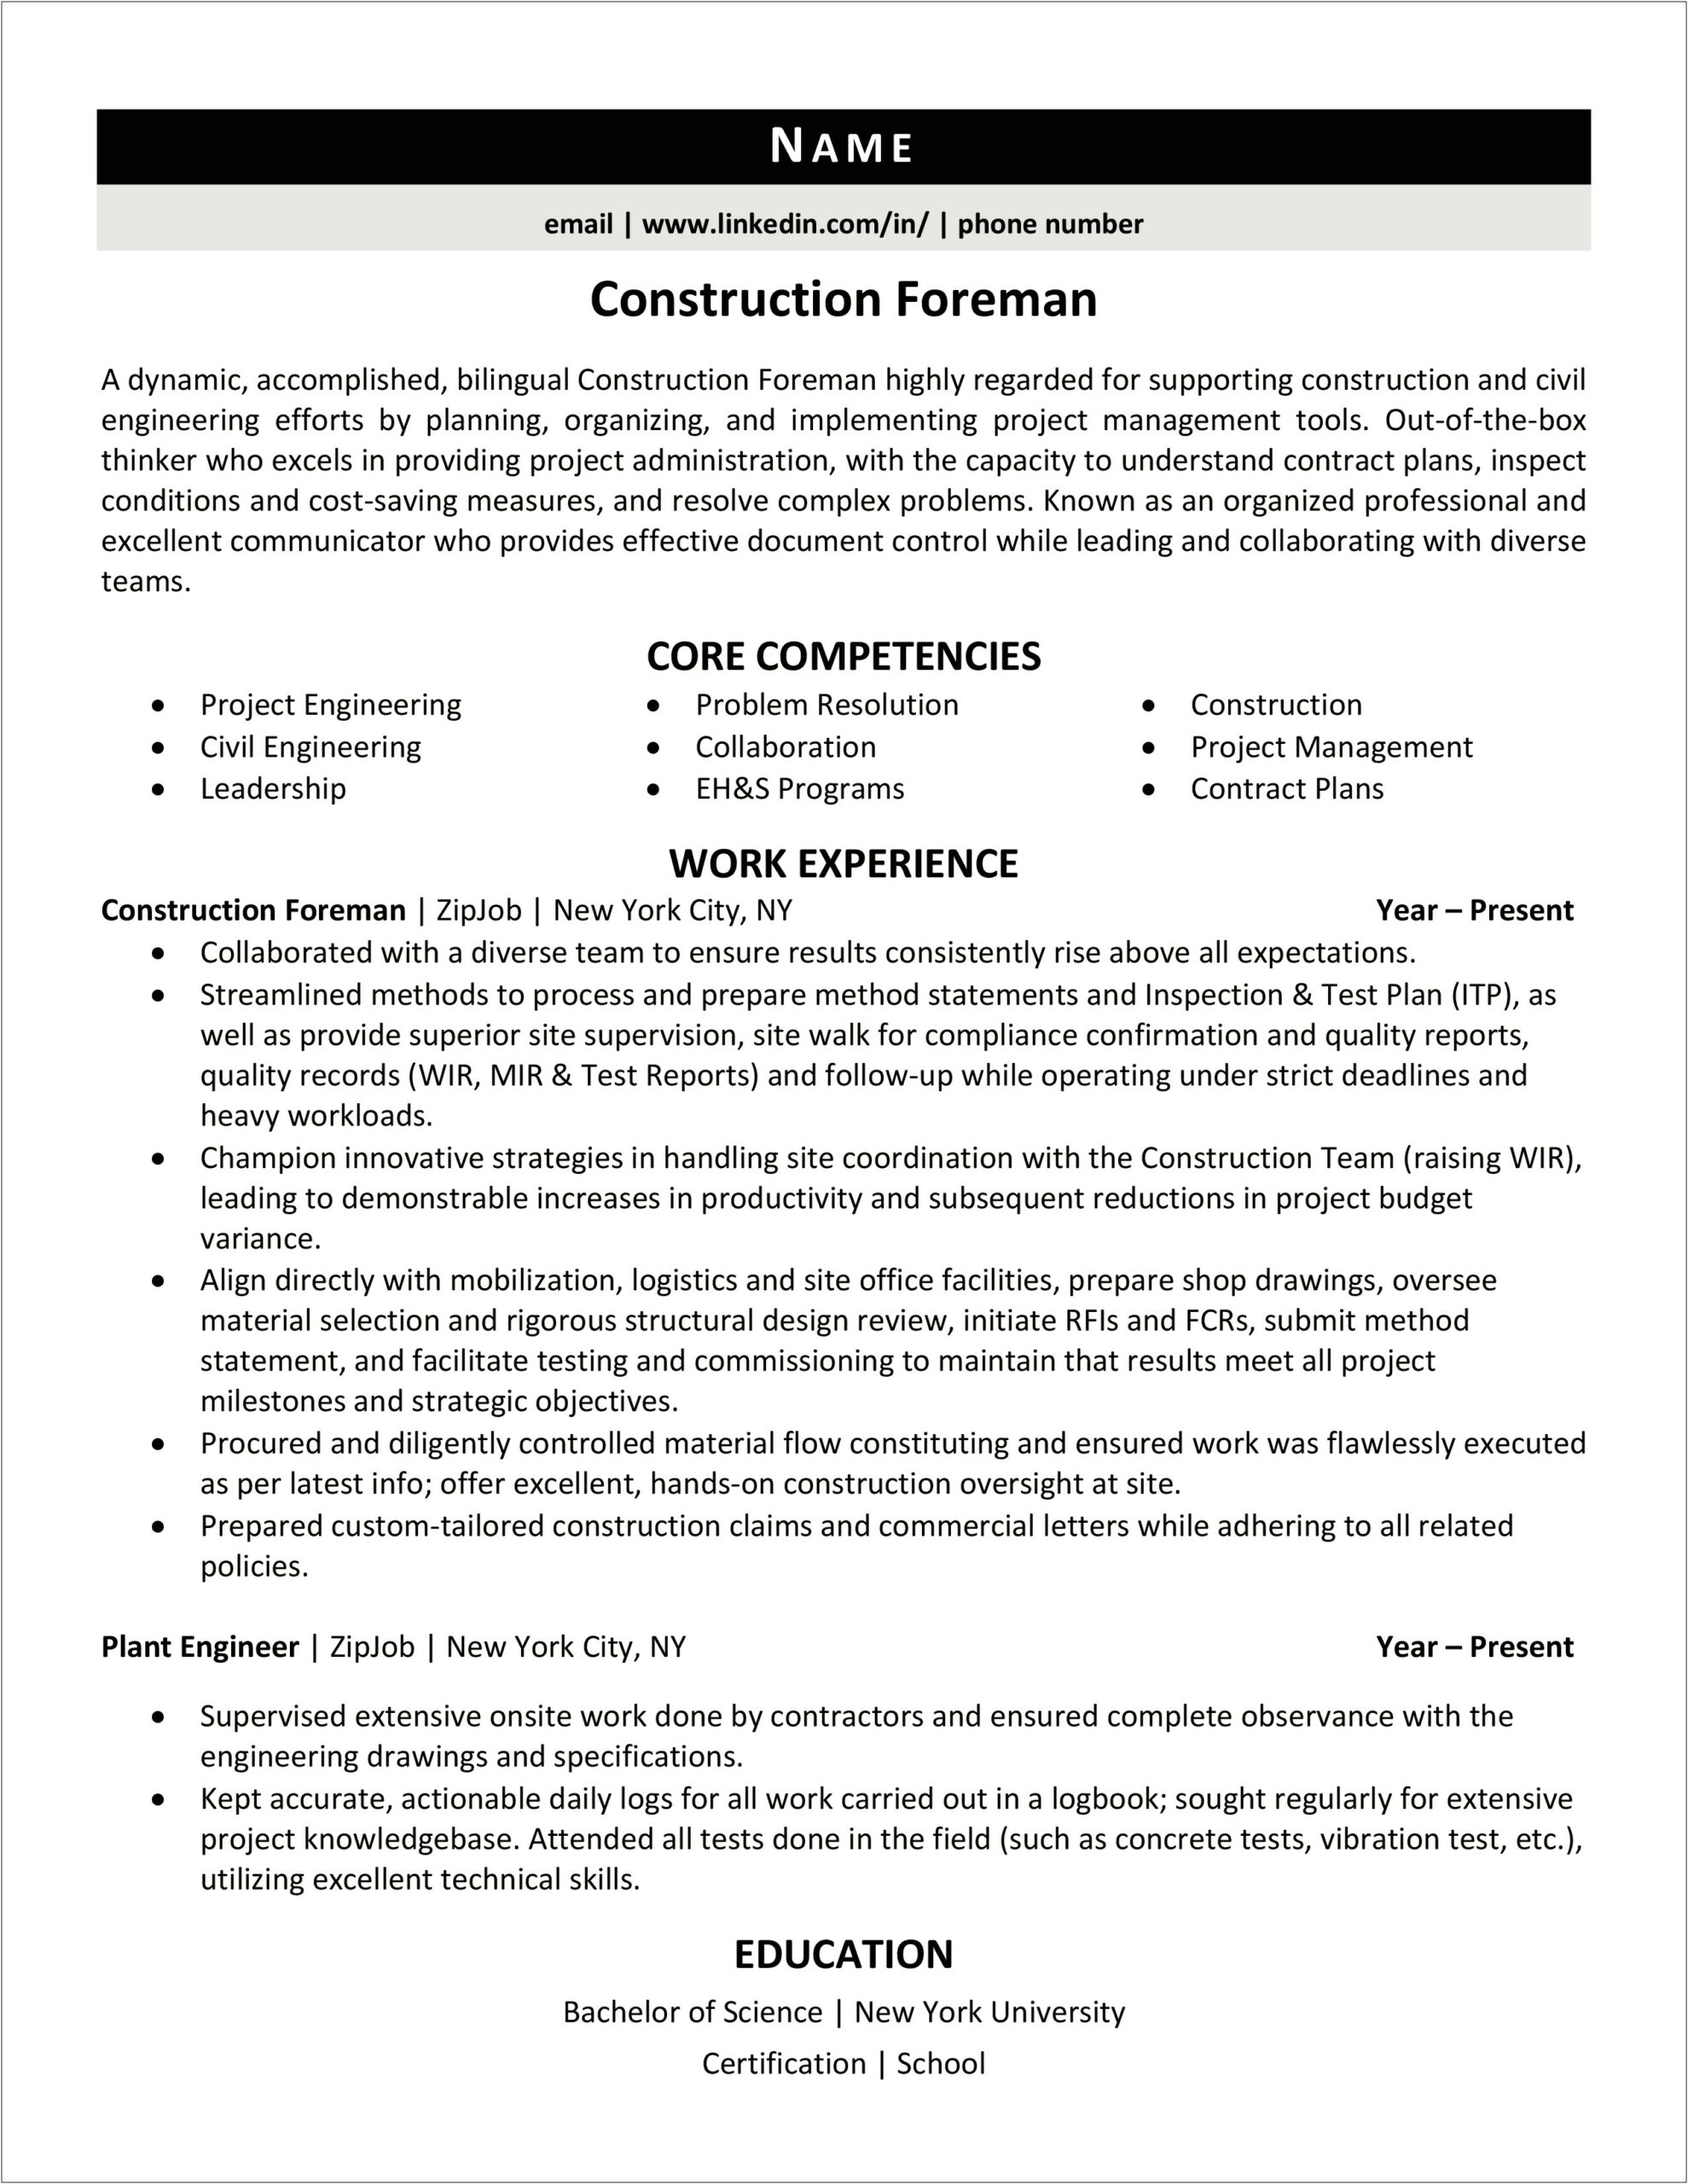 Best Resume Attributes For Construction Project Engineer